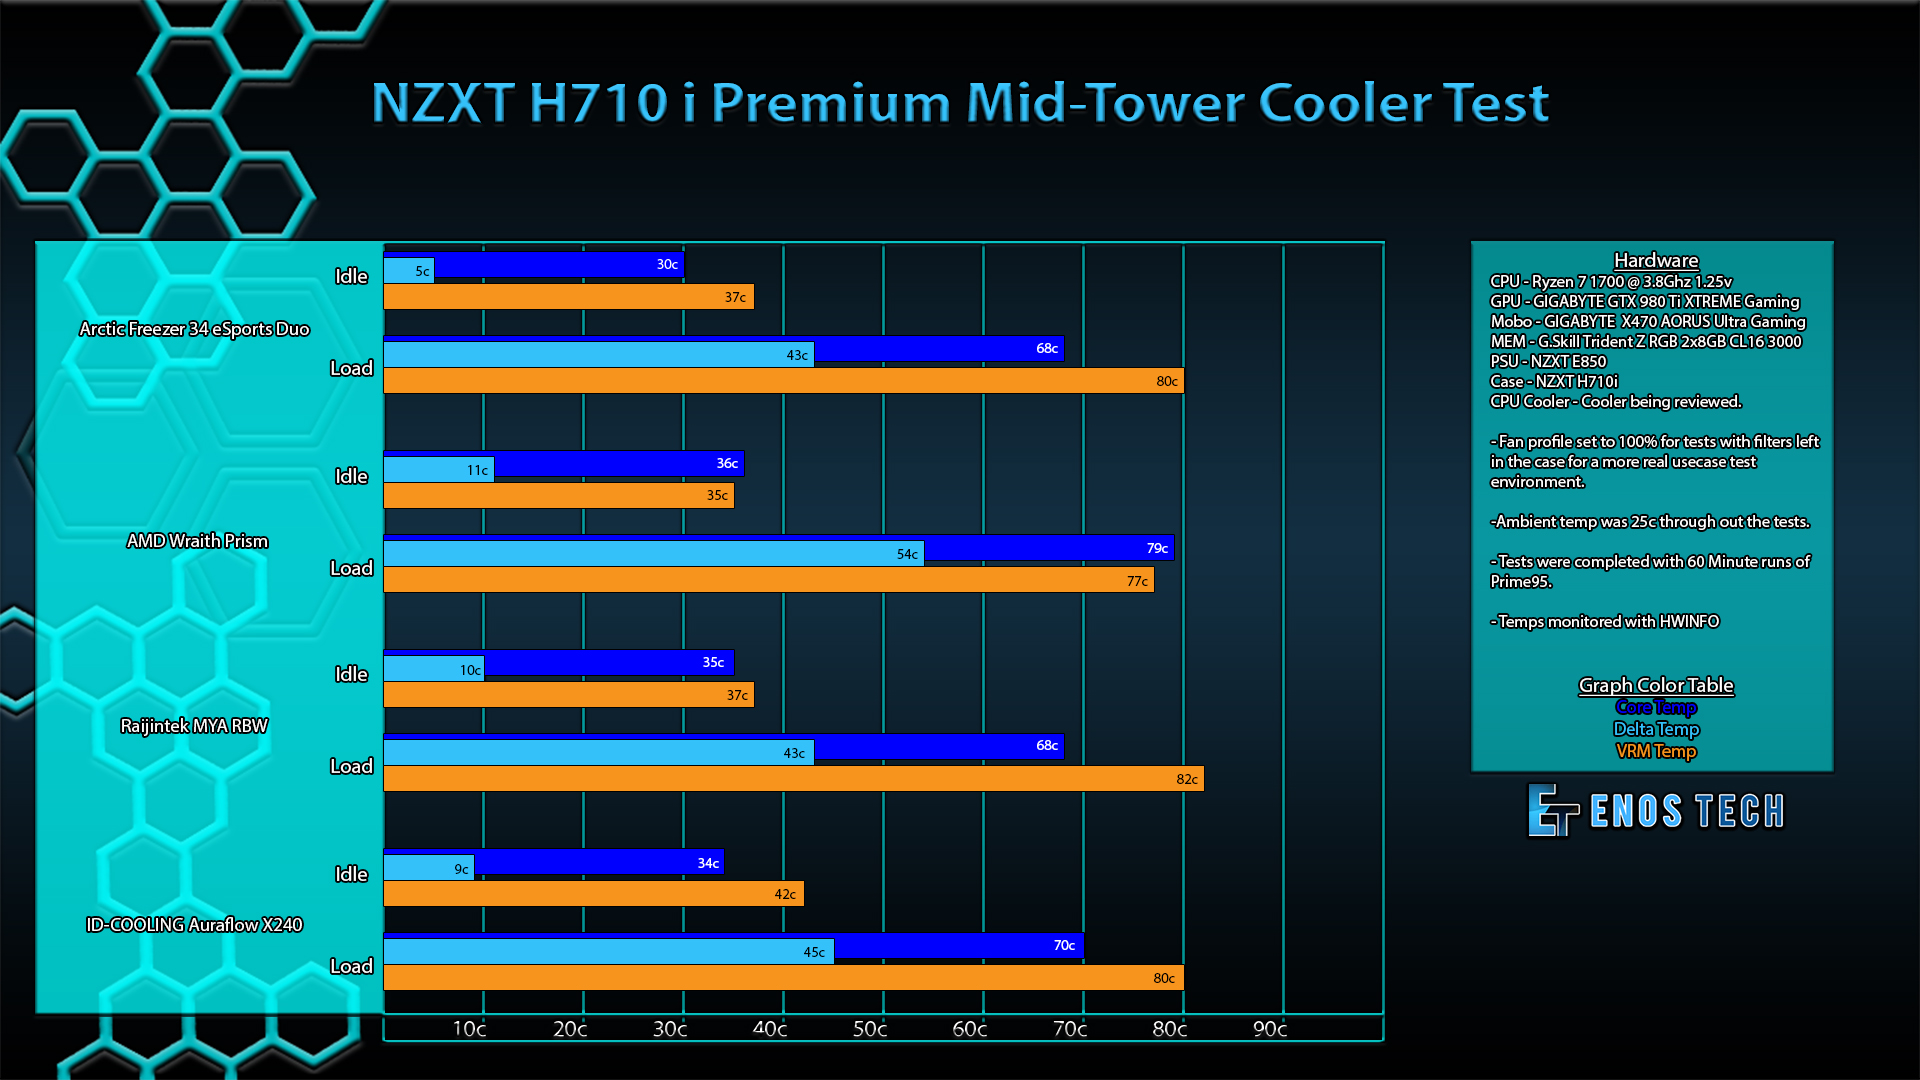 NZXT H710i Cooler Results